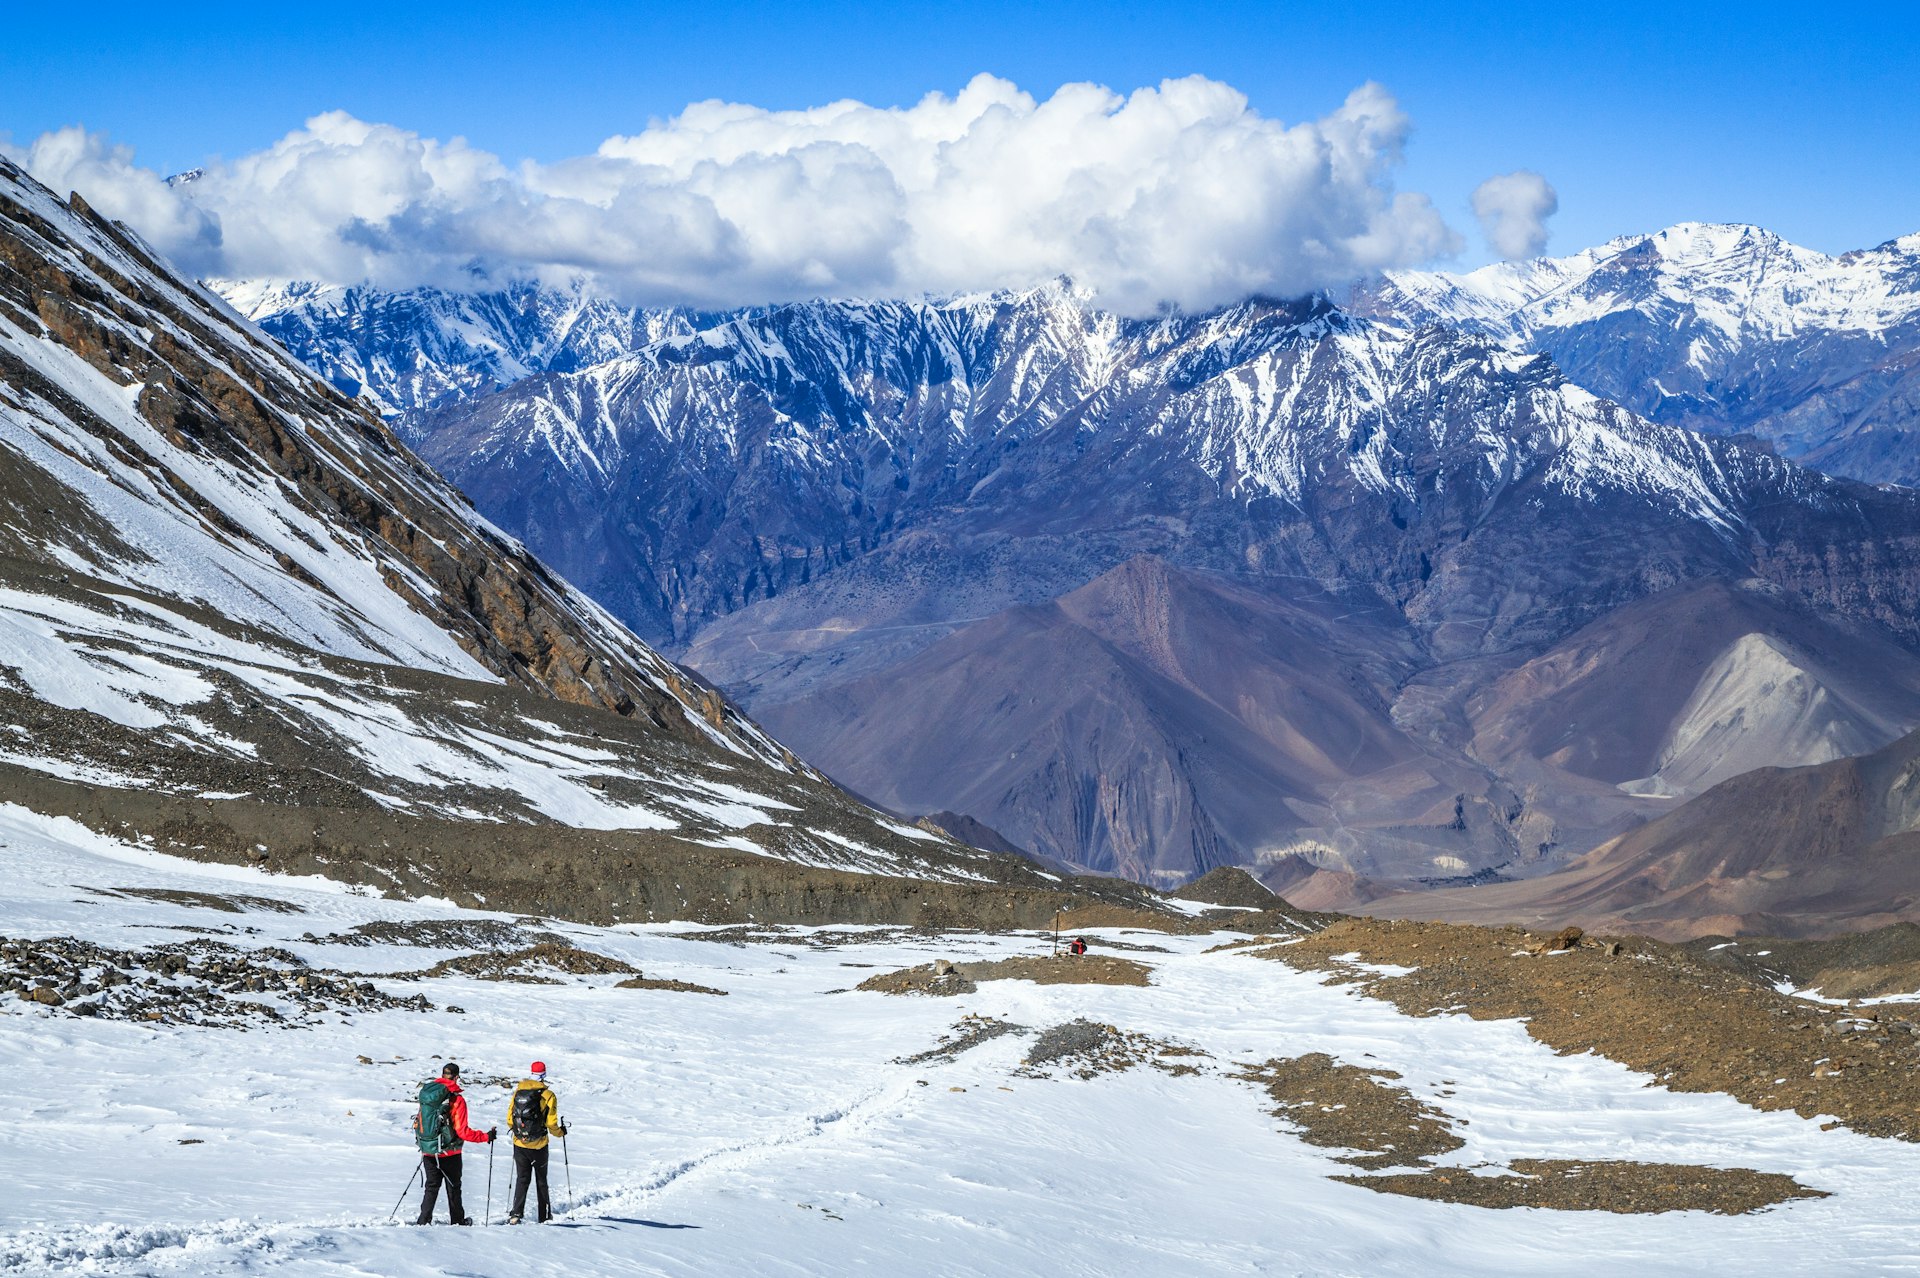 Trekkers crossing the Thorong La to Muktinath on the Annapurna Circuit